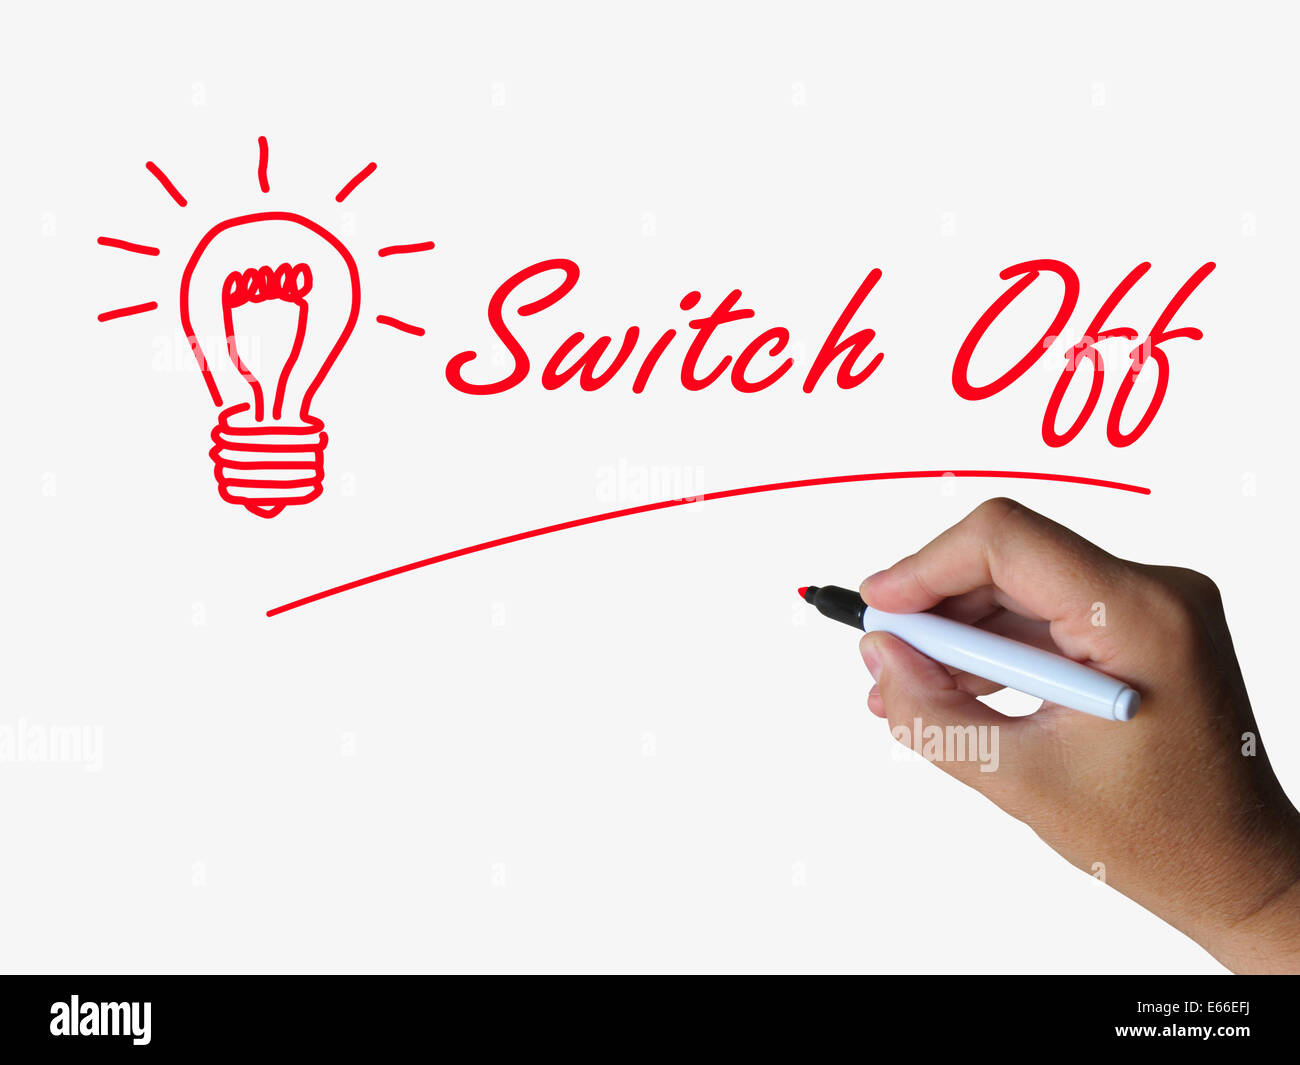 Switch Off Lightbulb Referring to Switching or Turning Stock Photo